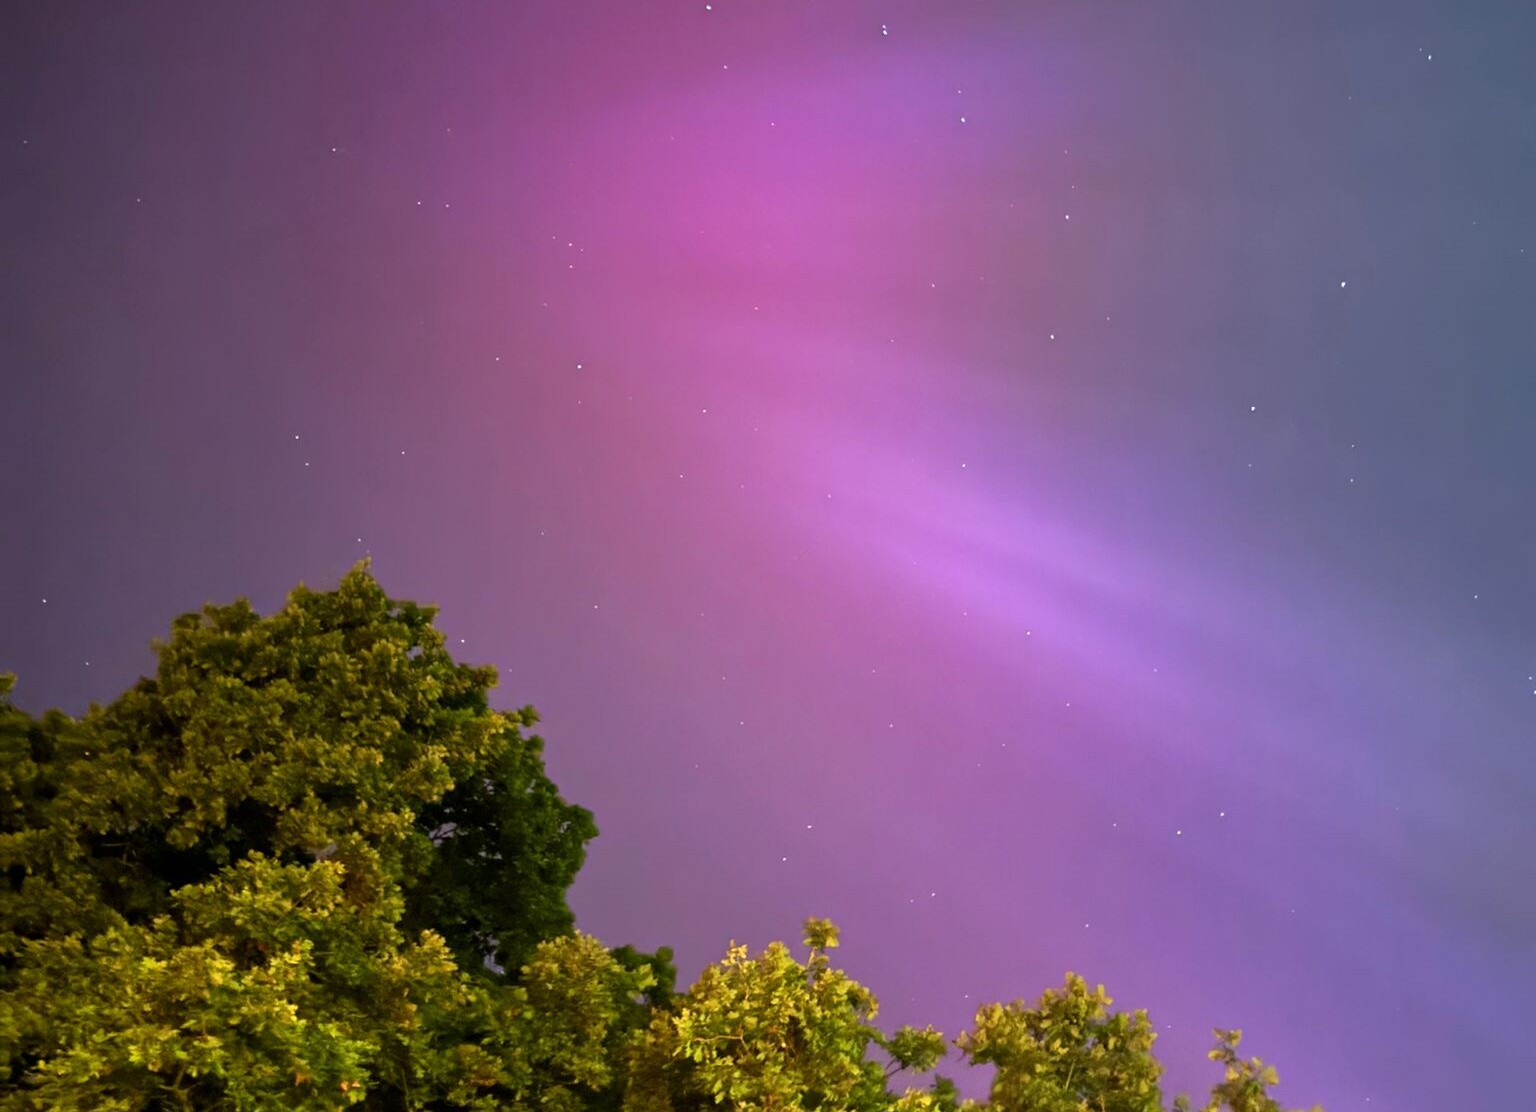 South Londoners “amazed” by spectacular Northern Lights display – South London News